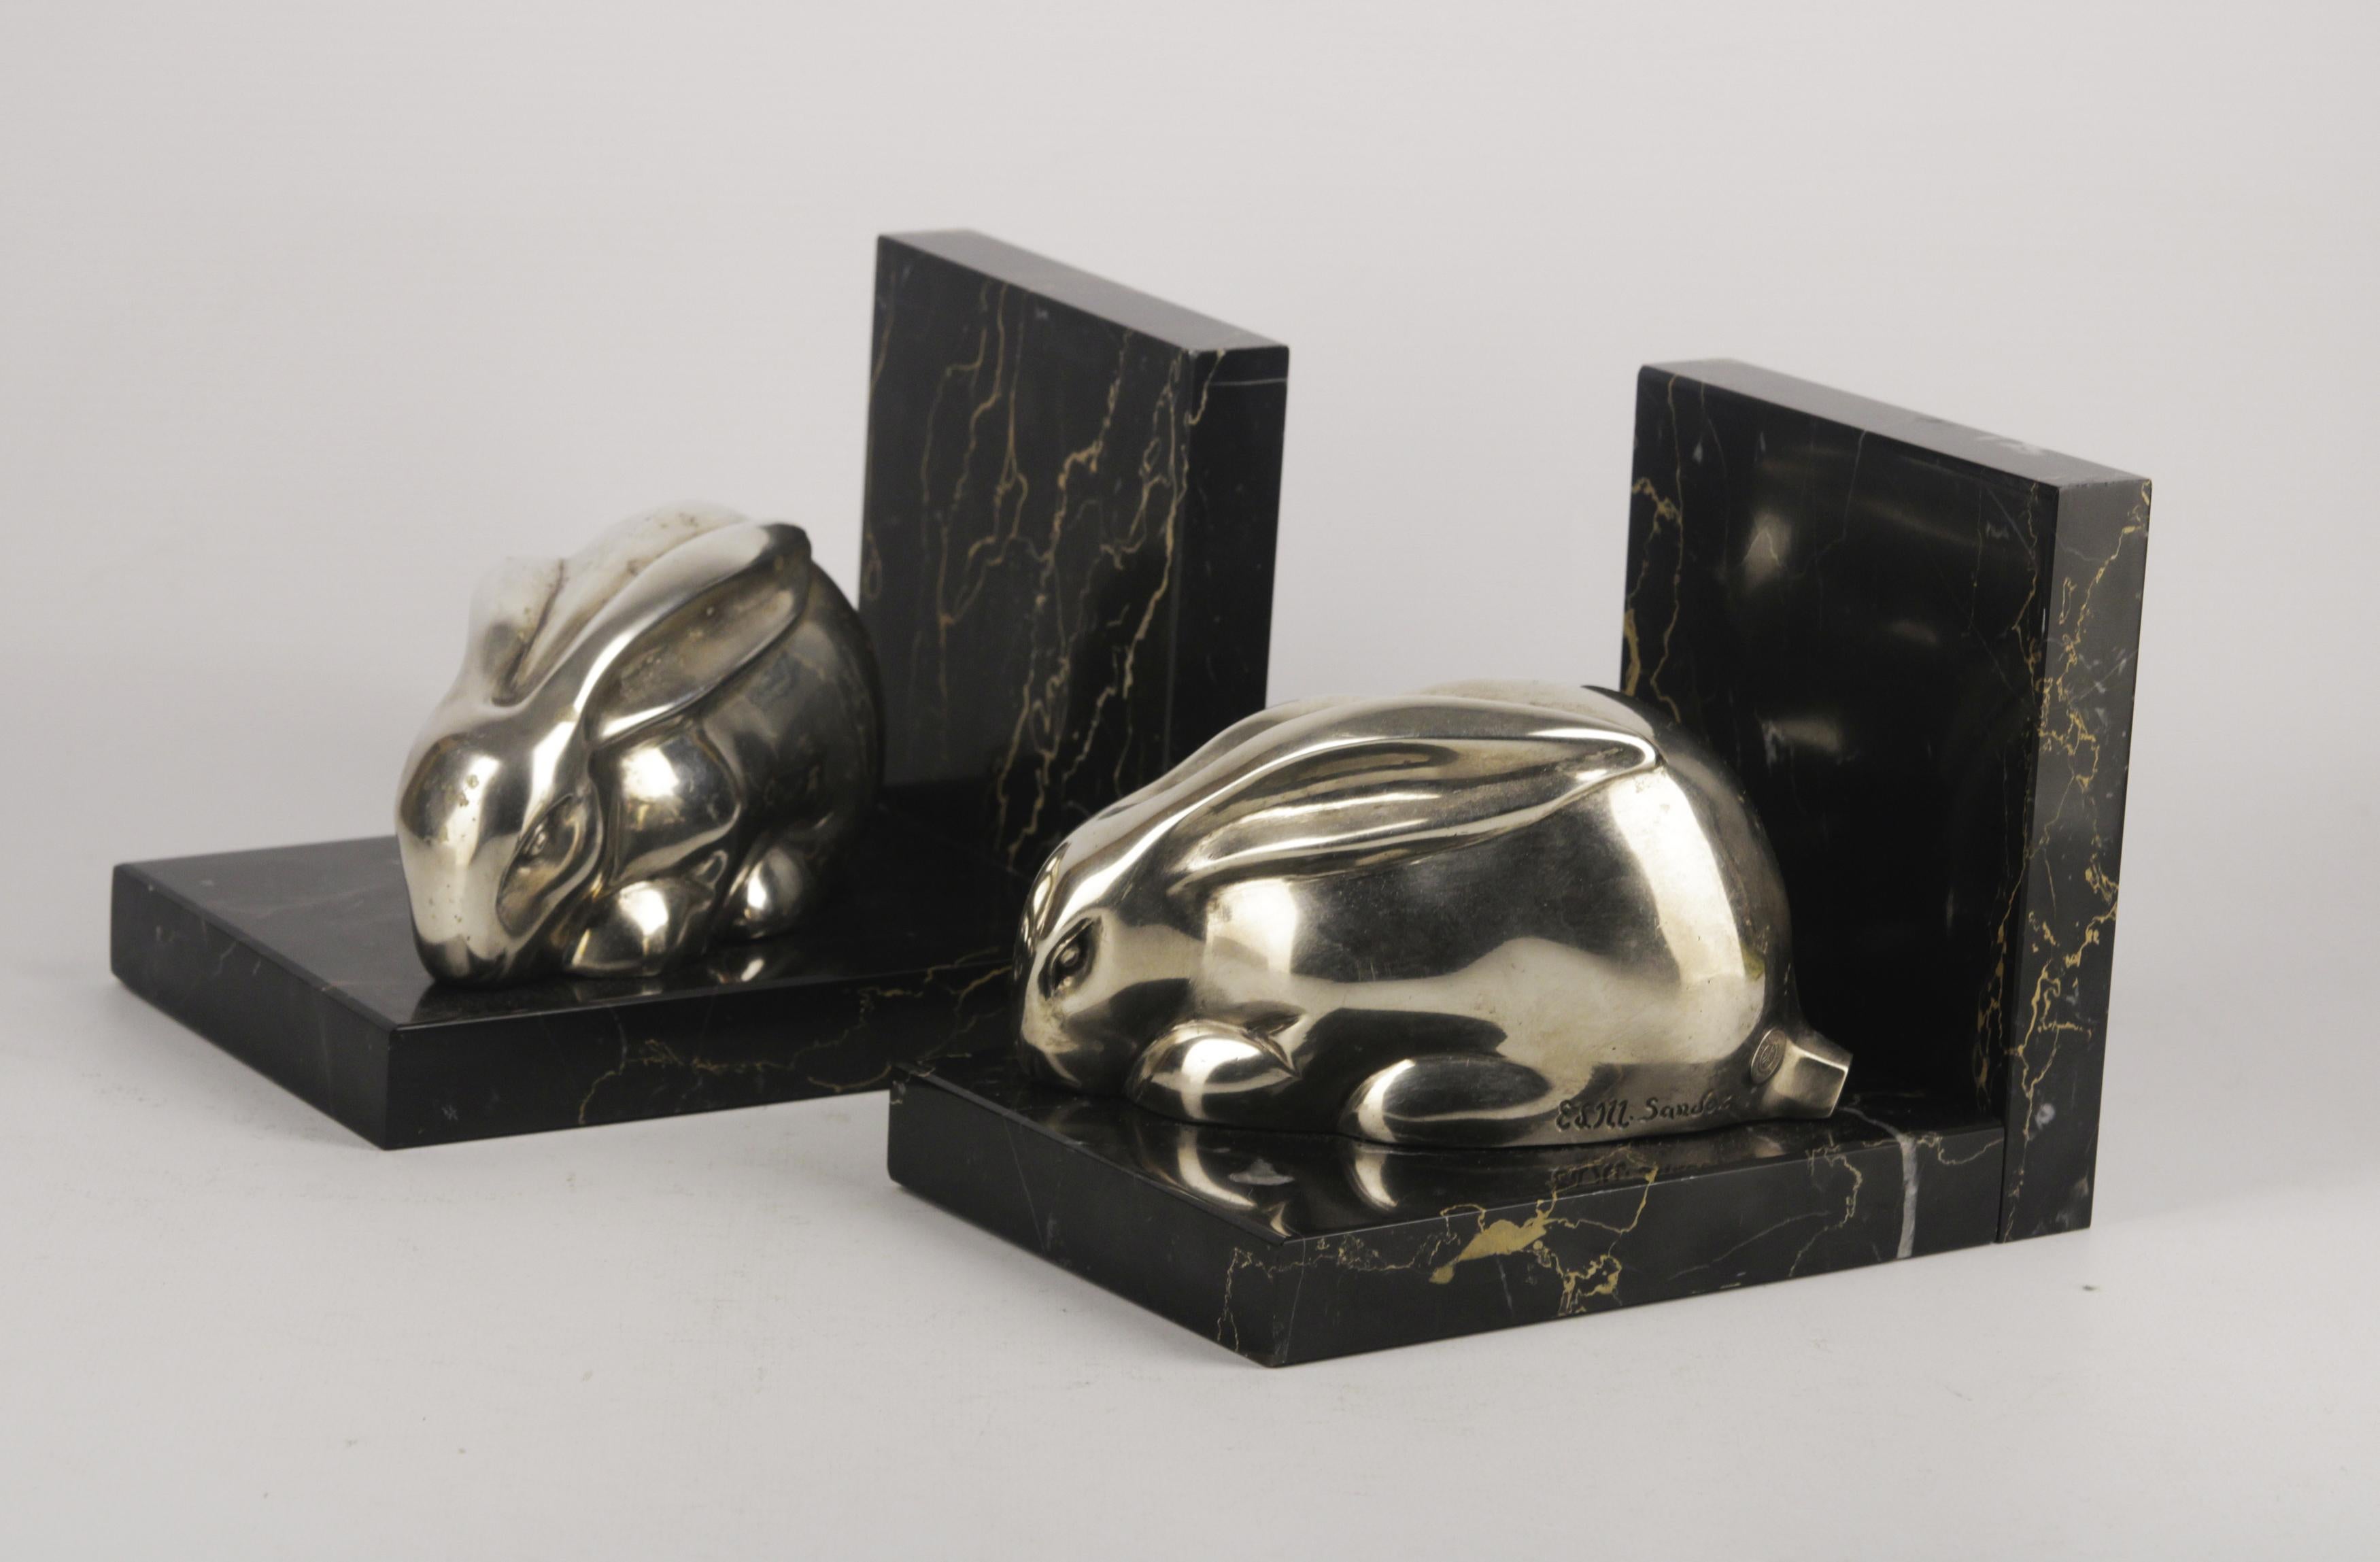 Pair of Art Deco bookends rabbit figure signed E.M. SANDOZ and Susse Frères .Silver plated bronze and black marble base. Origin France. Circa 1930.Perfect condition. Measures: 13x17x11cm each one. 
The Susse Frères firm was established in 1839 by